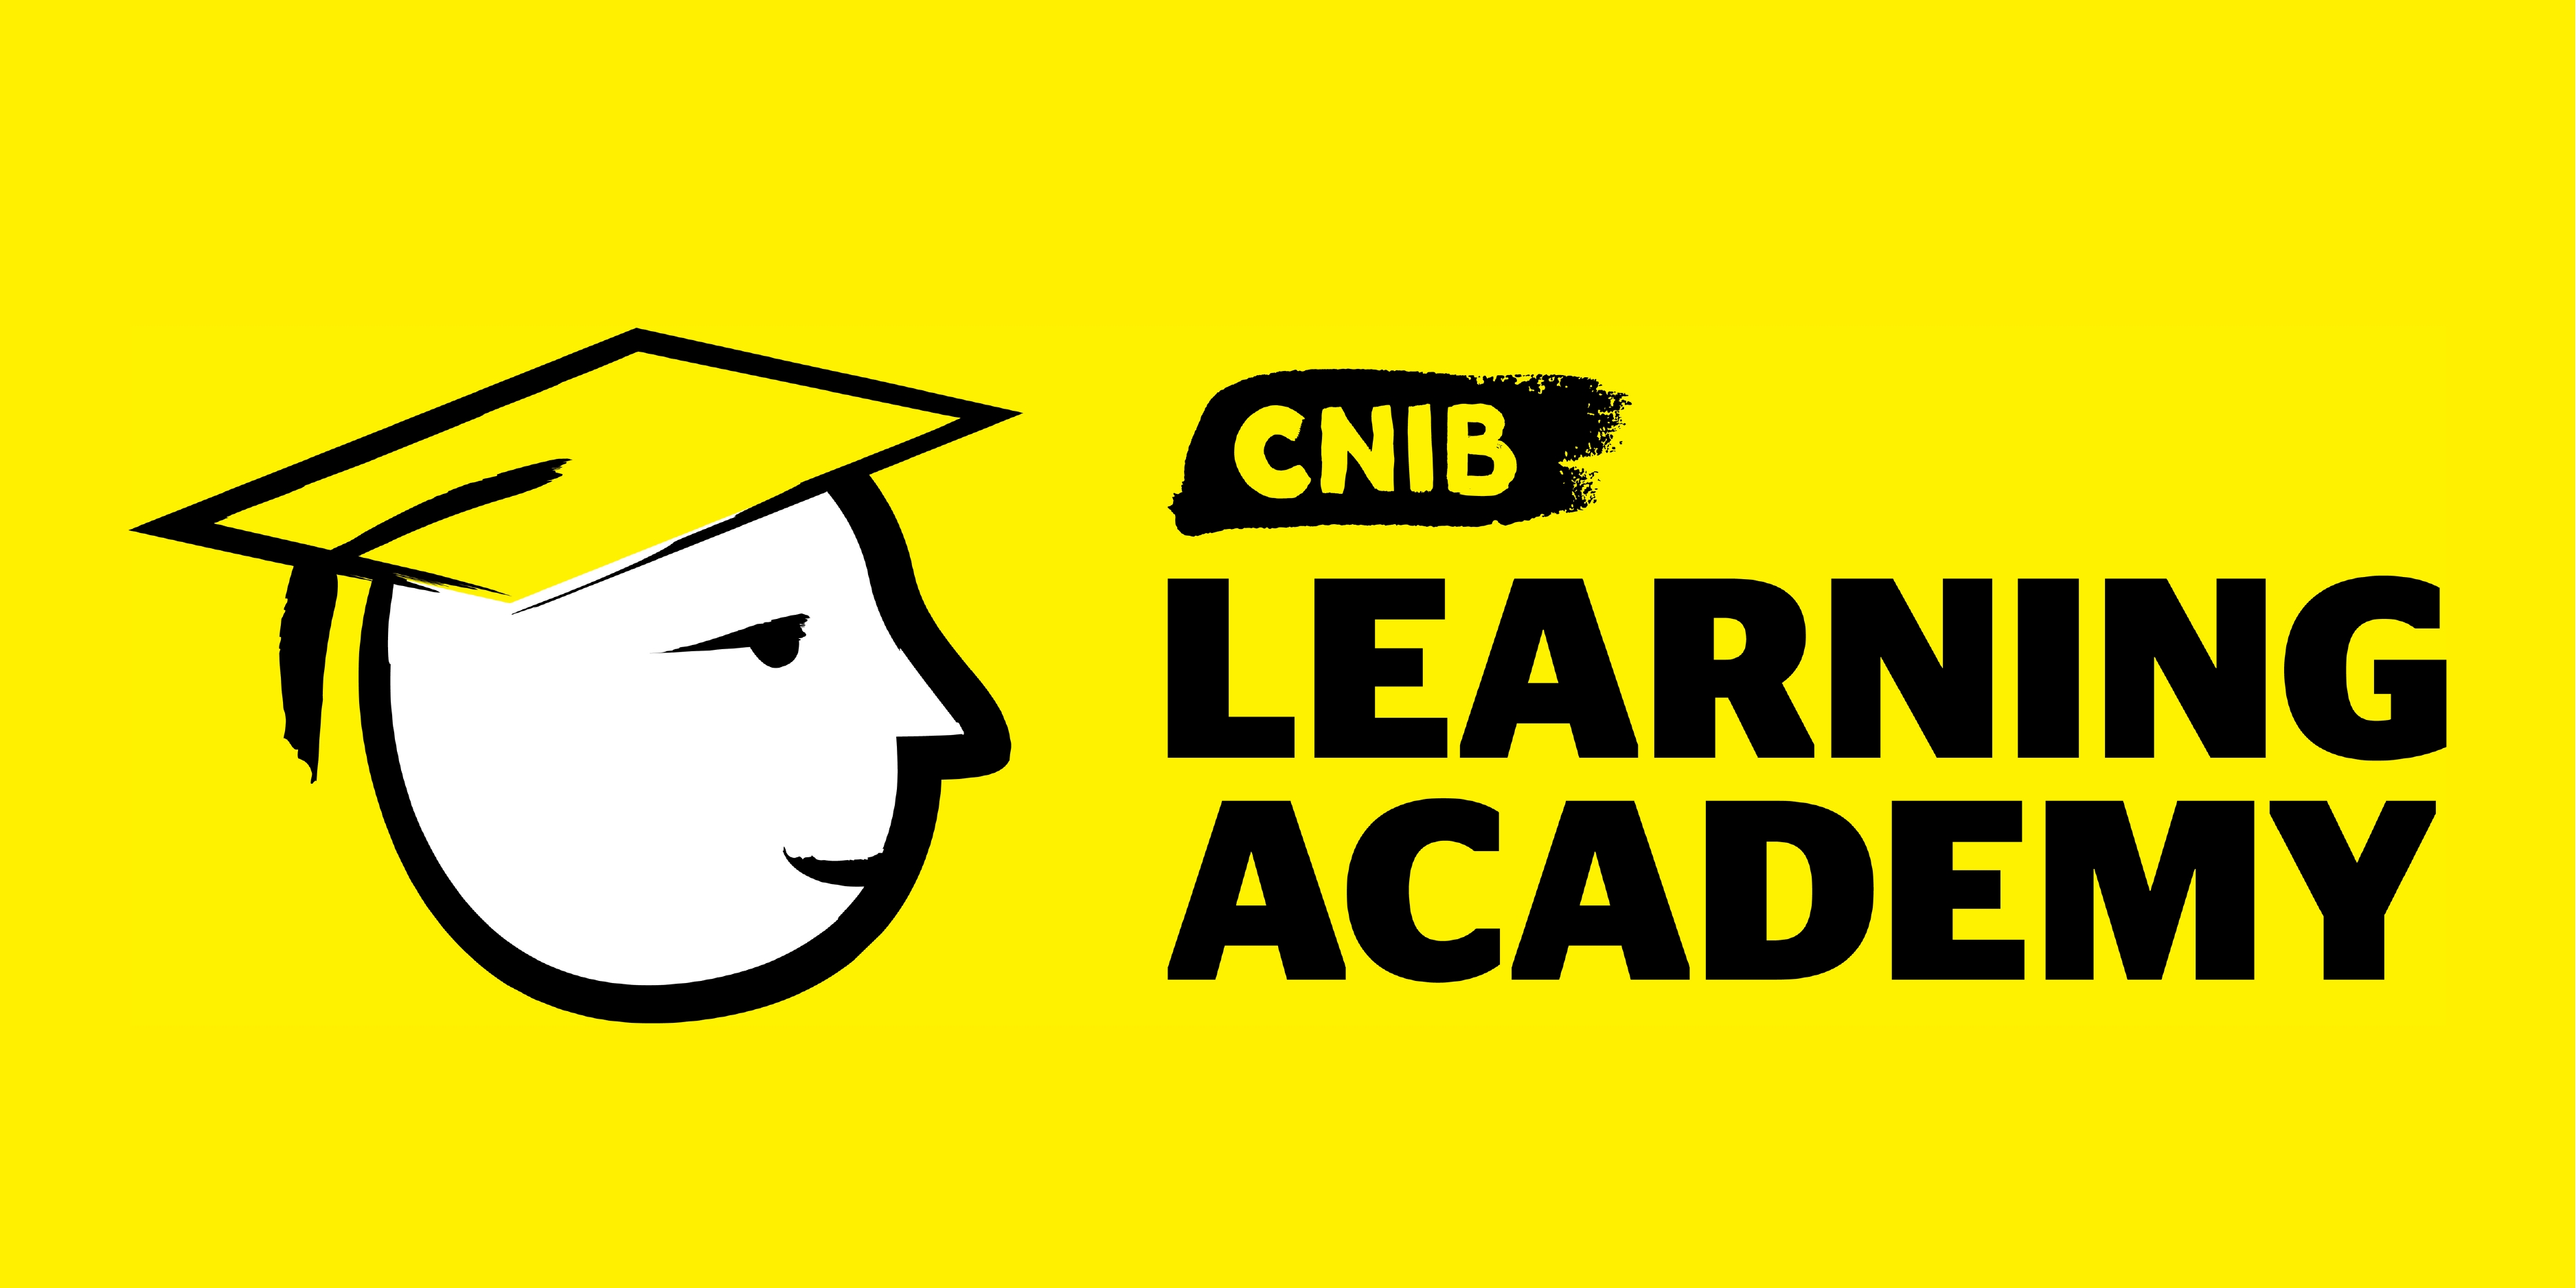 CNIB Learning academy logo. A graphic-art illustration of a smiling face/icon wearing a graduation cap with white accents. Text: CNIB Learning Academy 